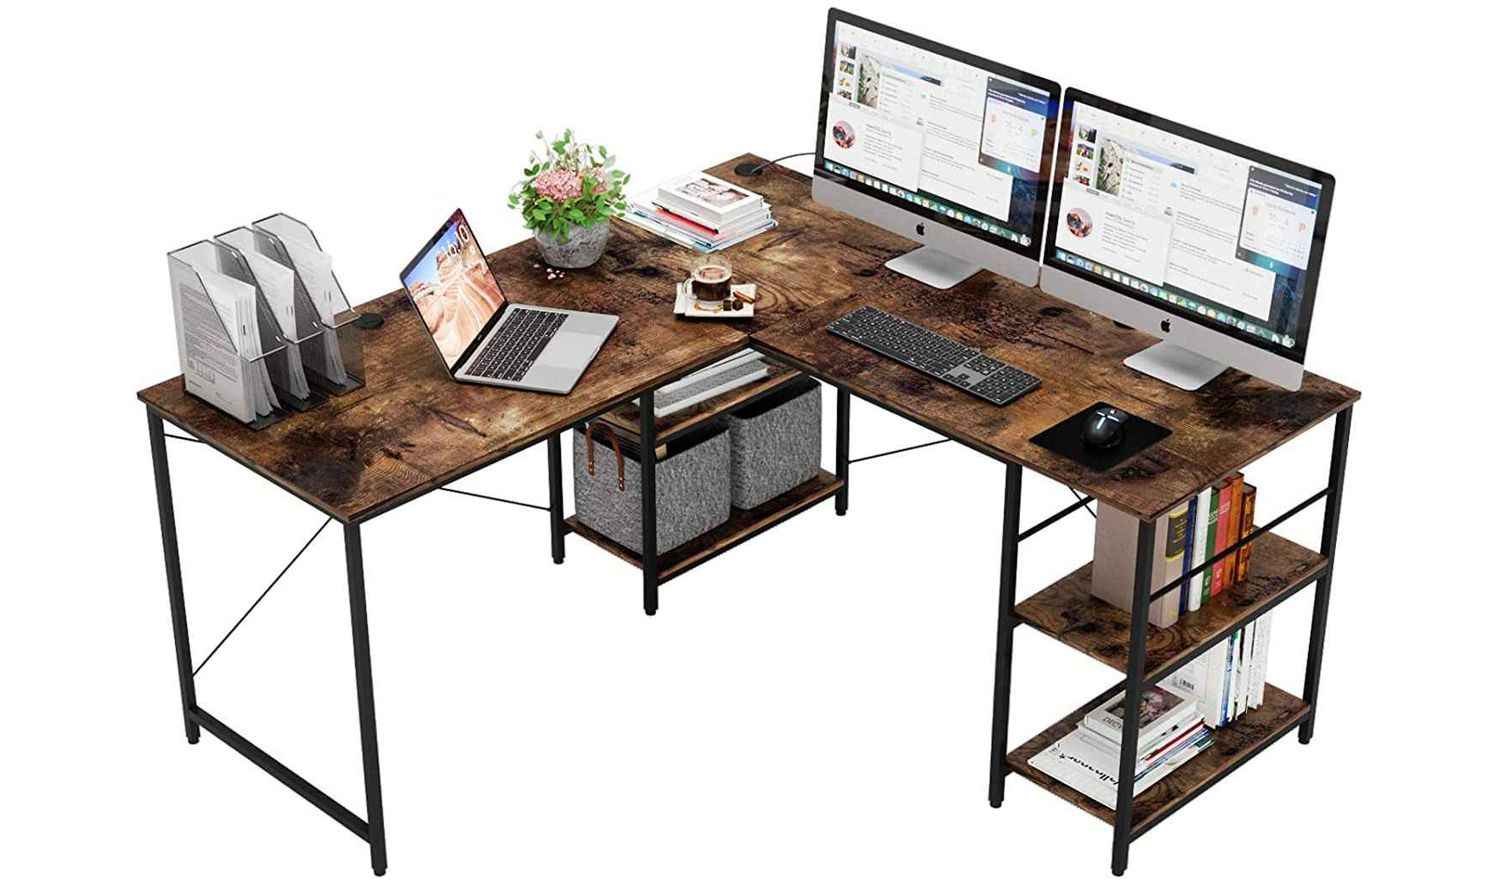 The NetDigz Editors rate the Bestier with Reversible Corner as the Best L-shaped Office Desk.